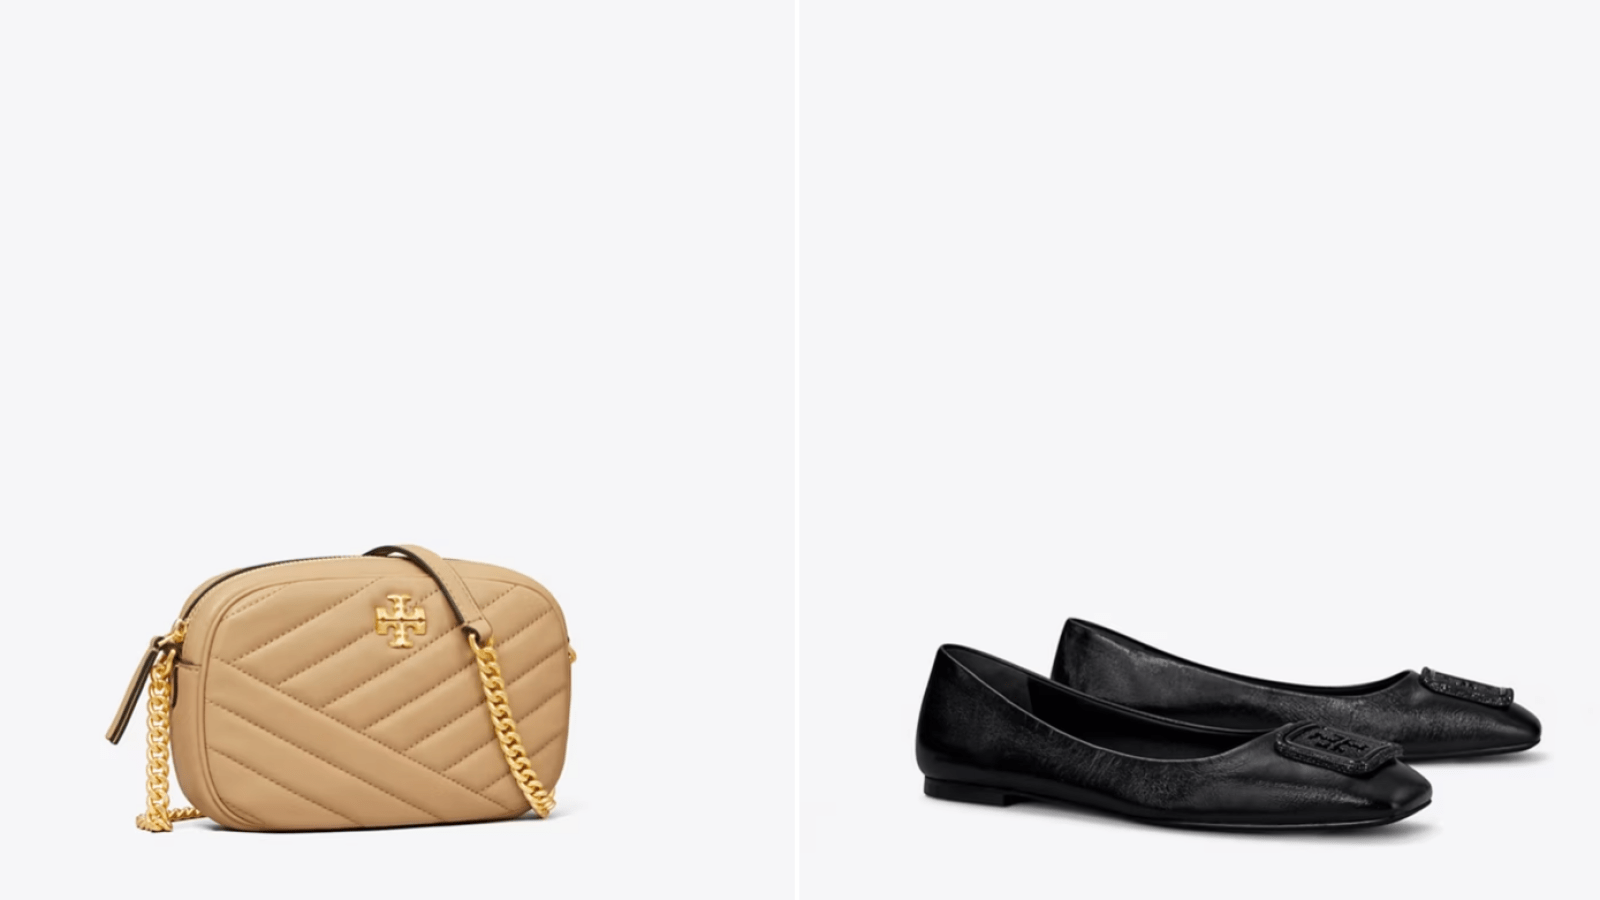 Best Tory Burch Black Friday Deals Up to 50% Off